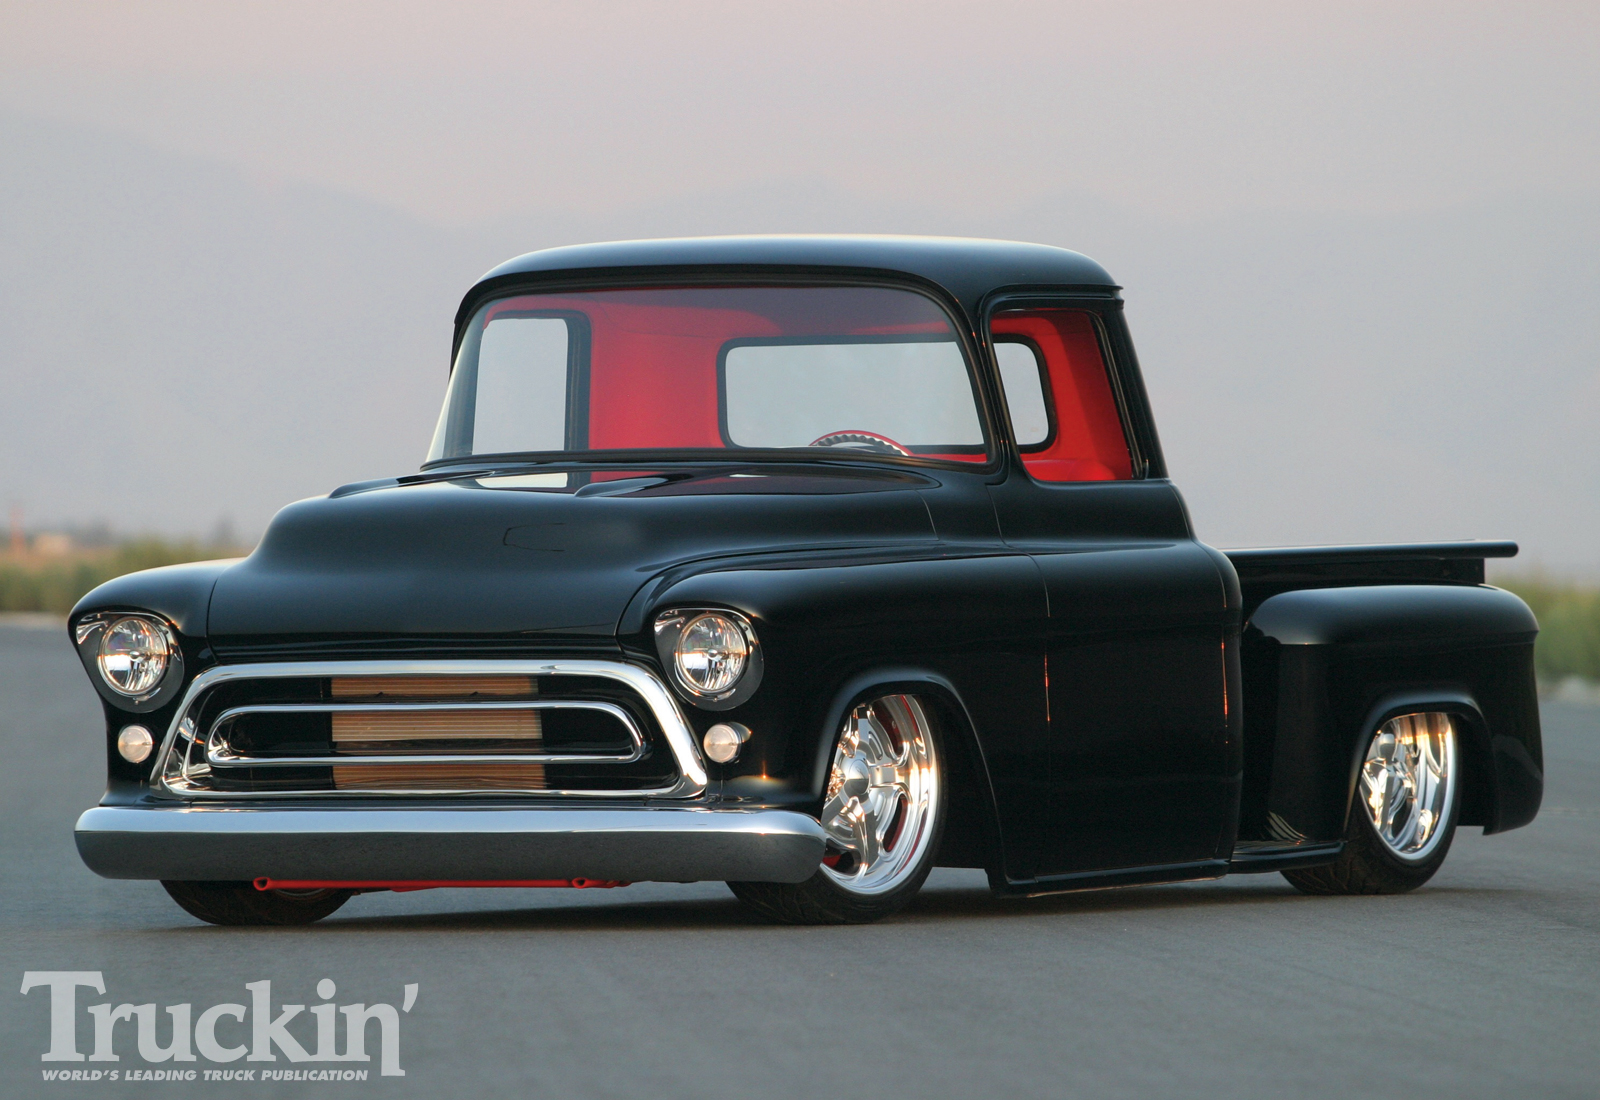 Nice Images Collection: Chevrolet Pickup  Desktop Wallpapers